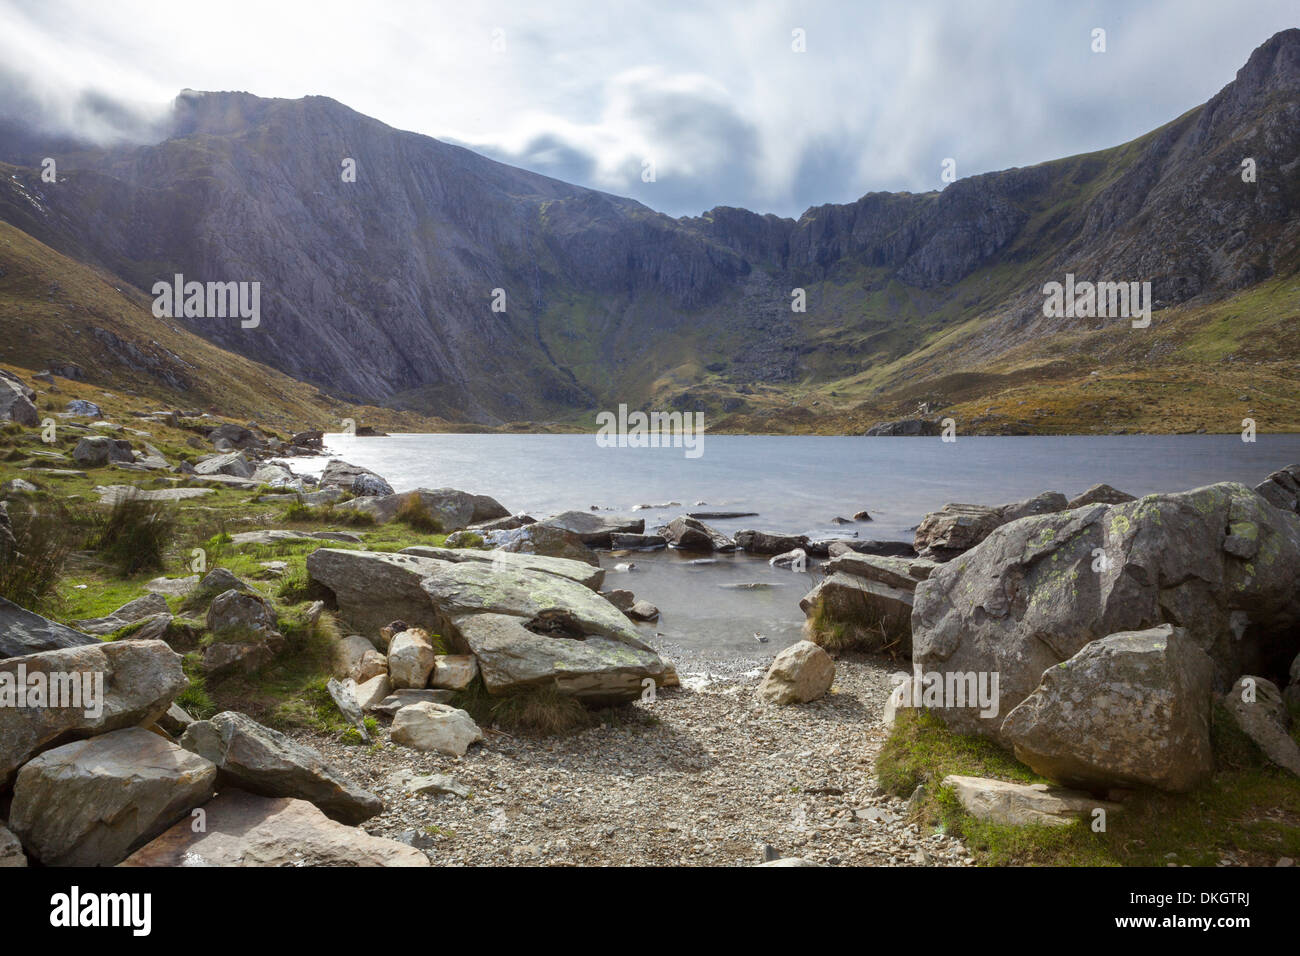 An unnamed source in the Ogwen Valley with the Glyderau mountain range behind, Gwynedd, Snowdonia National Park, Wales, UK Stock Photo